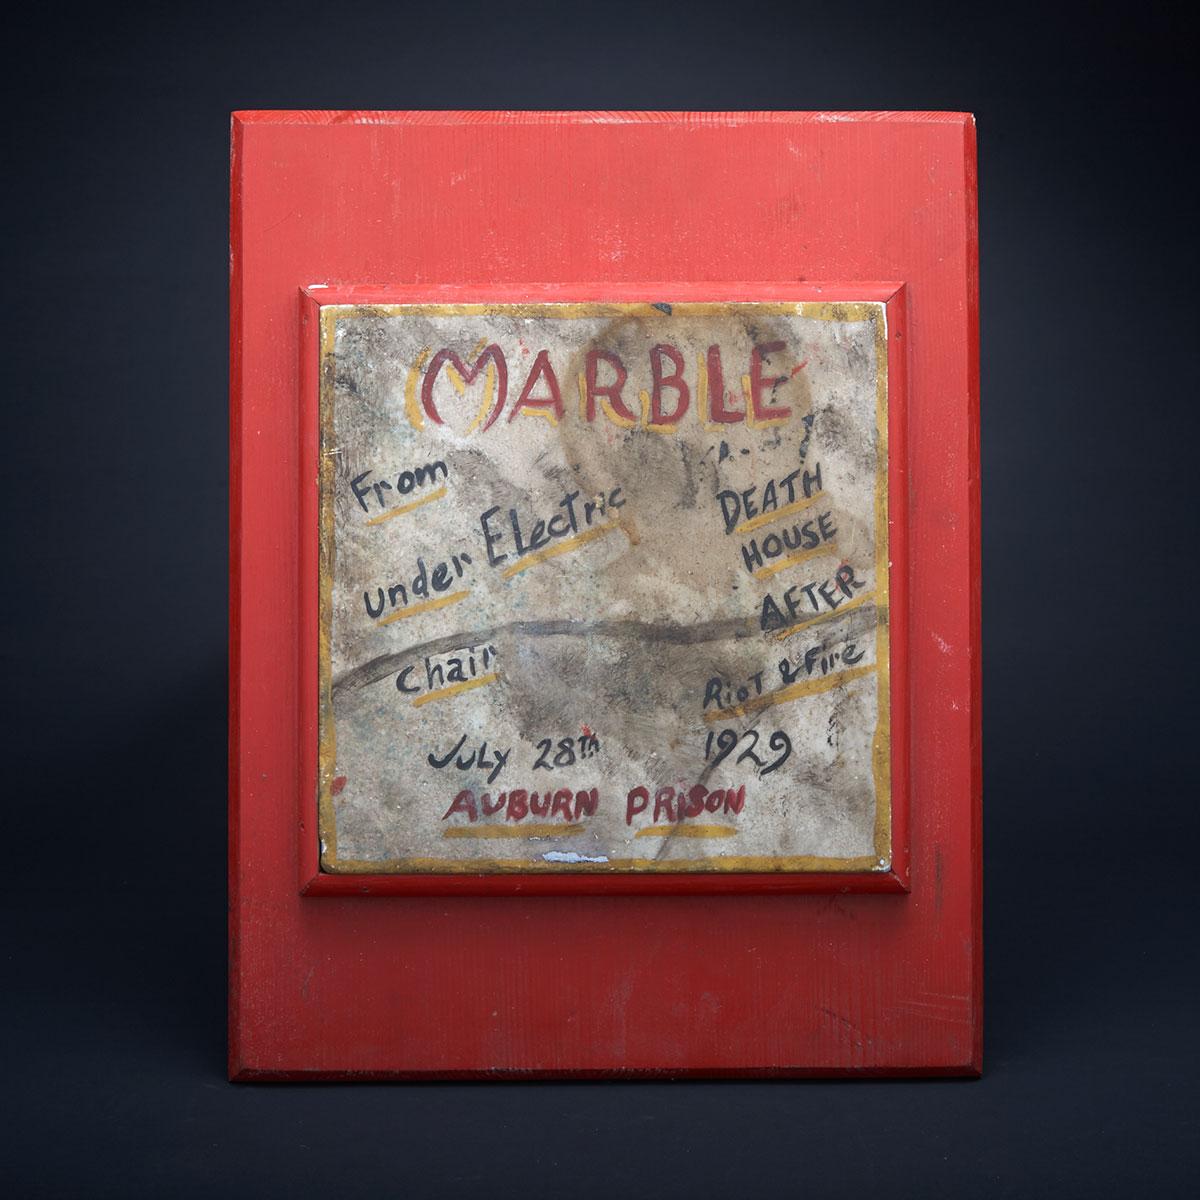 Marble Insulating Tile From Electric Chair at Auburn Prison, early 20th century